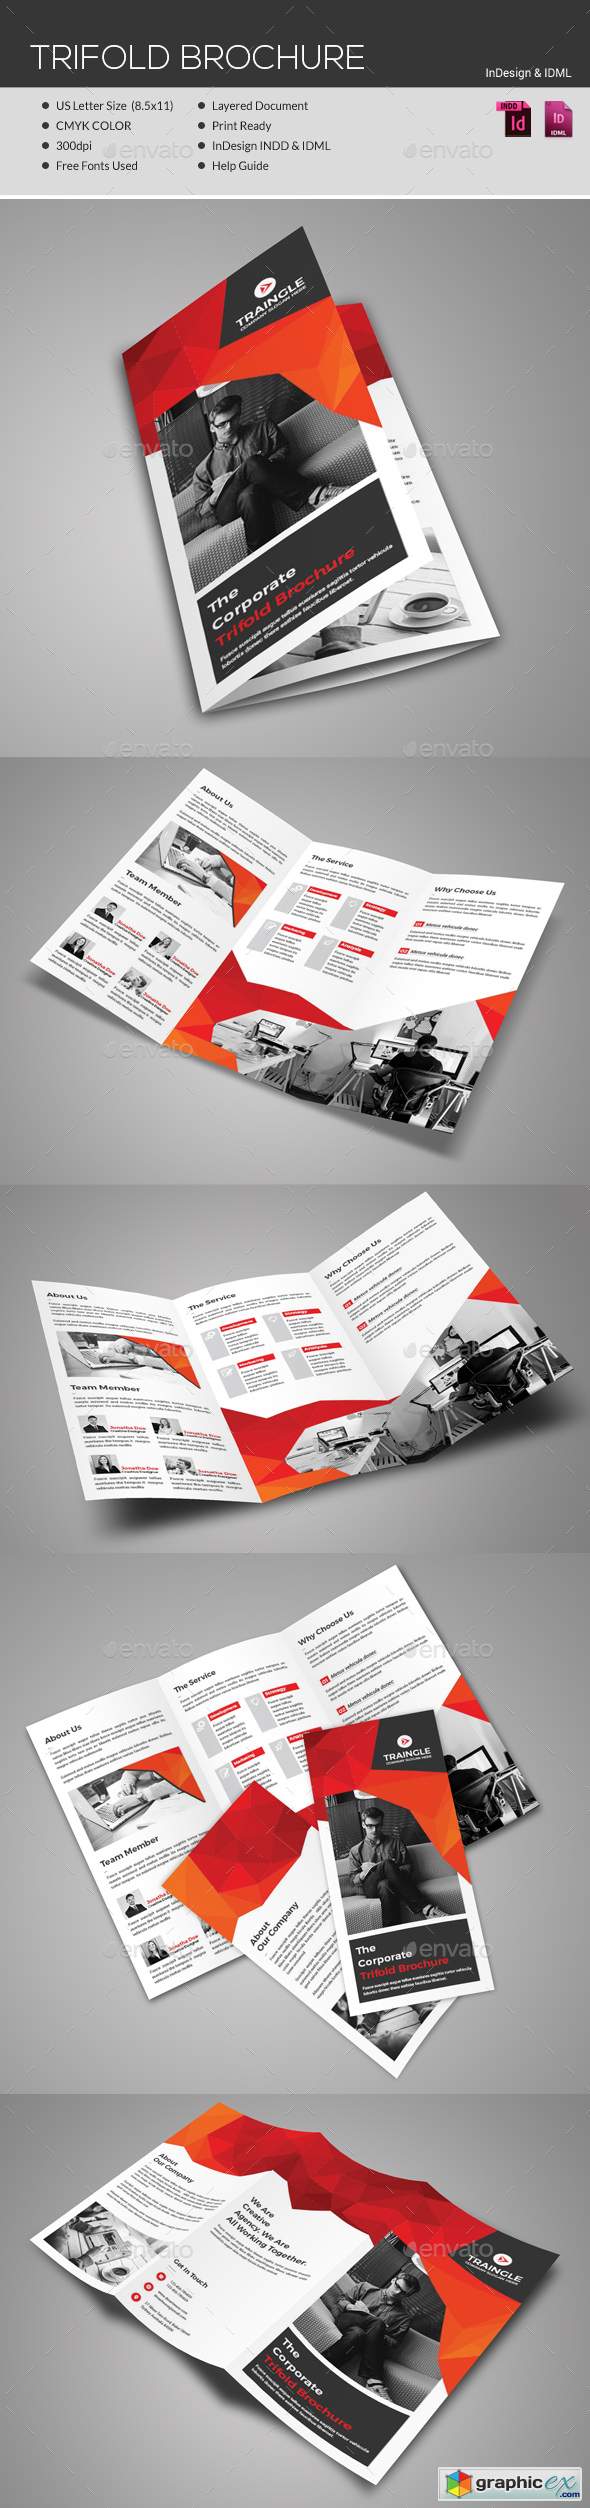 Trifold Brochure 21573089